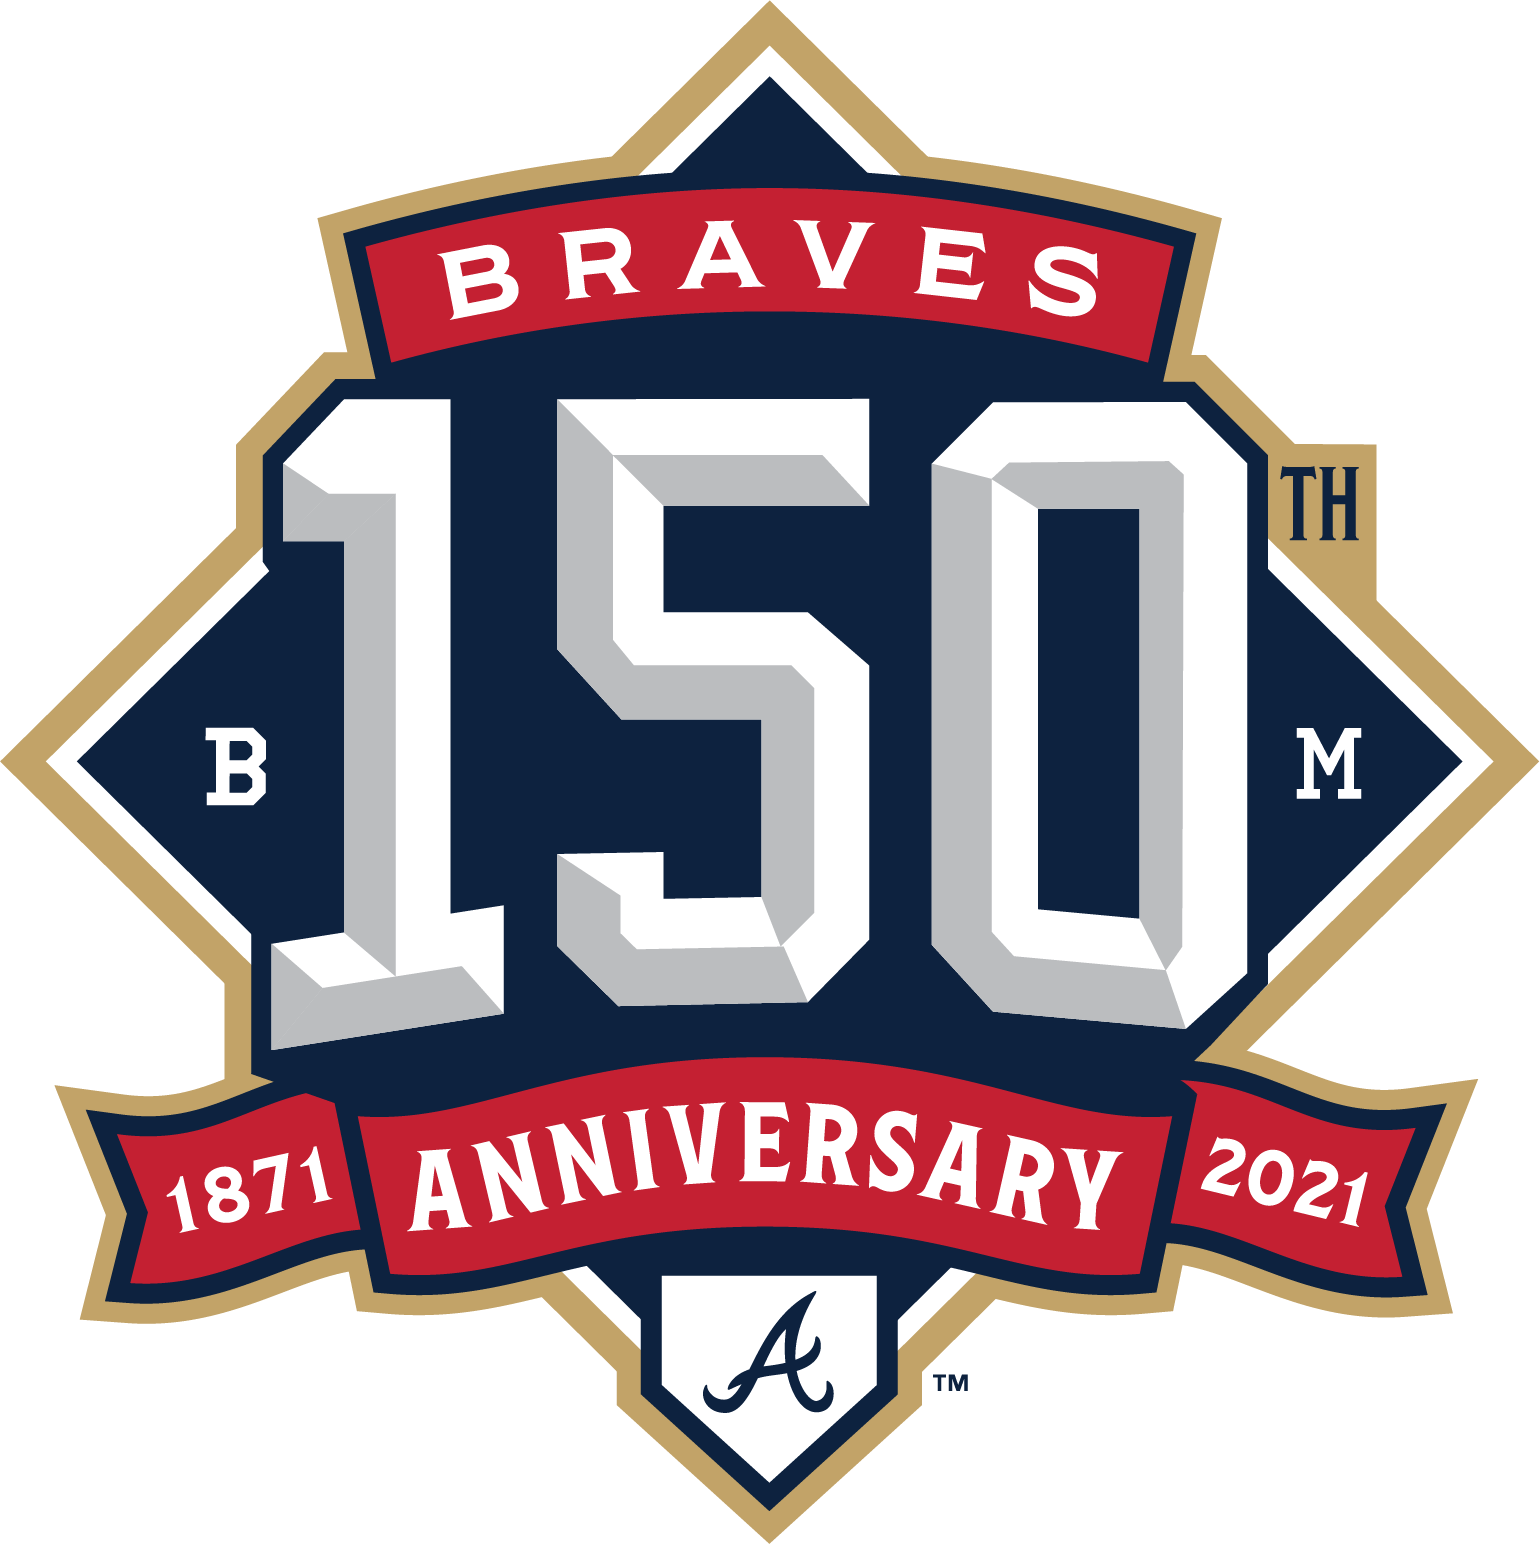 Paul Lukas on X: UPDATE: Braves have now officially announced